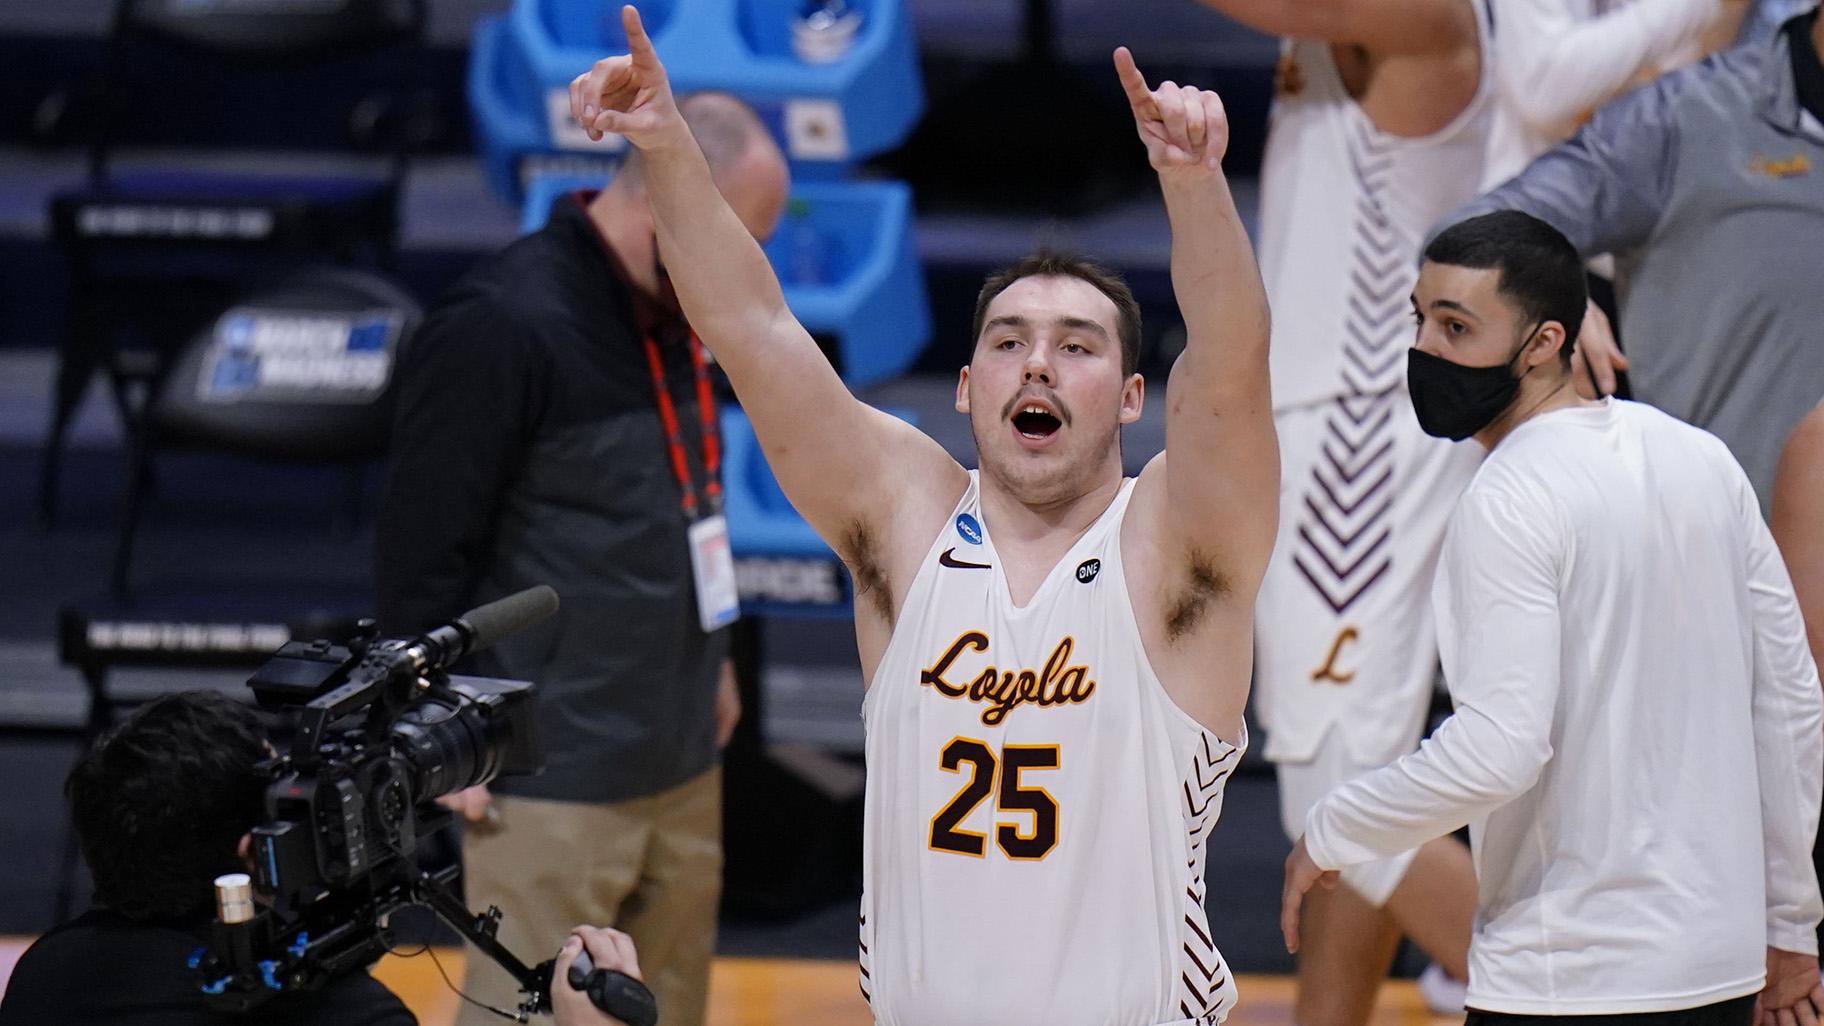 Loyola Chicago center Cameron Krutwig (25) celebrates after defeating Georgia Tech 71-60 in a first-round game in the NCAA men’s college basketball tournament at Hinkle Fieldhouse, Indianapolis, Friday, March 19, 2021. (AP Photo / AJ Mast)